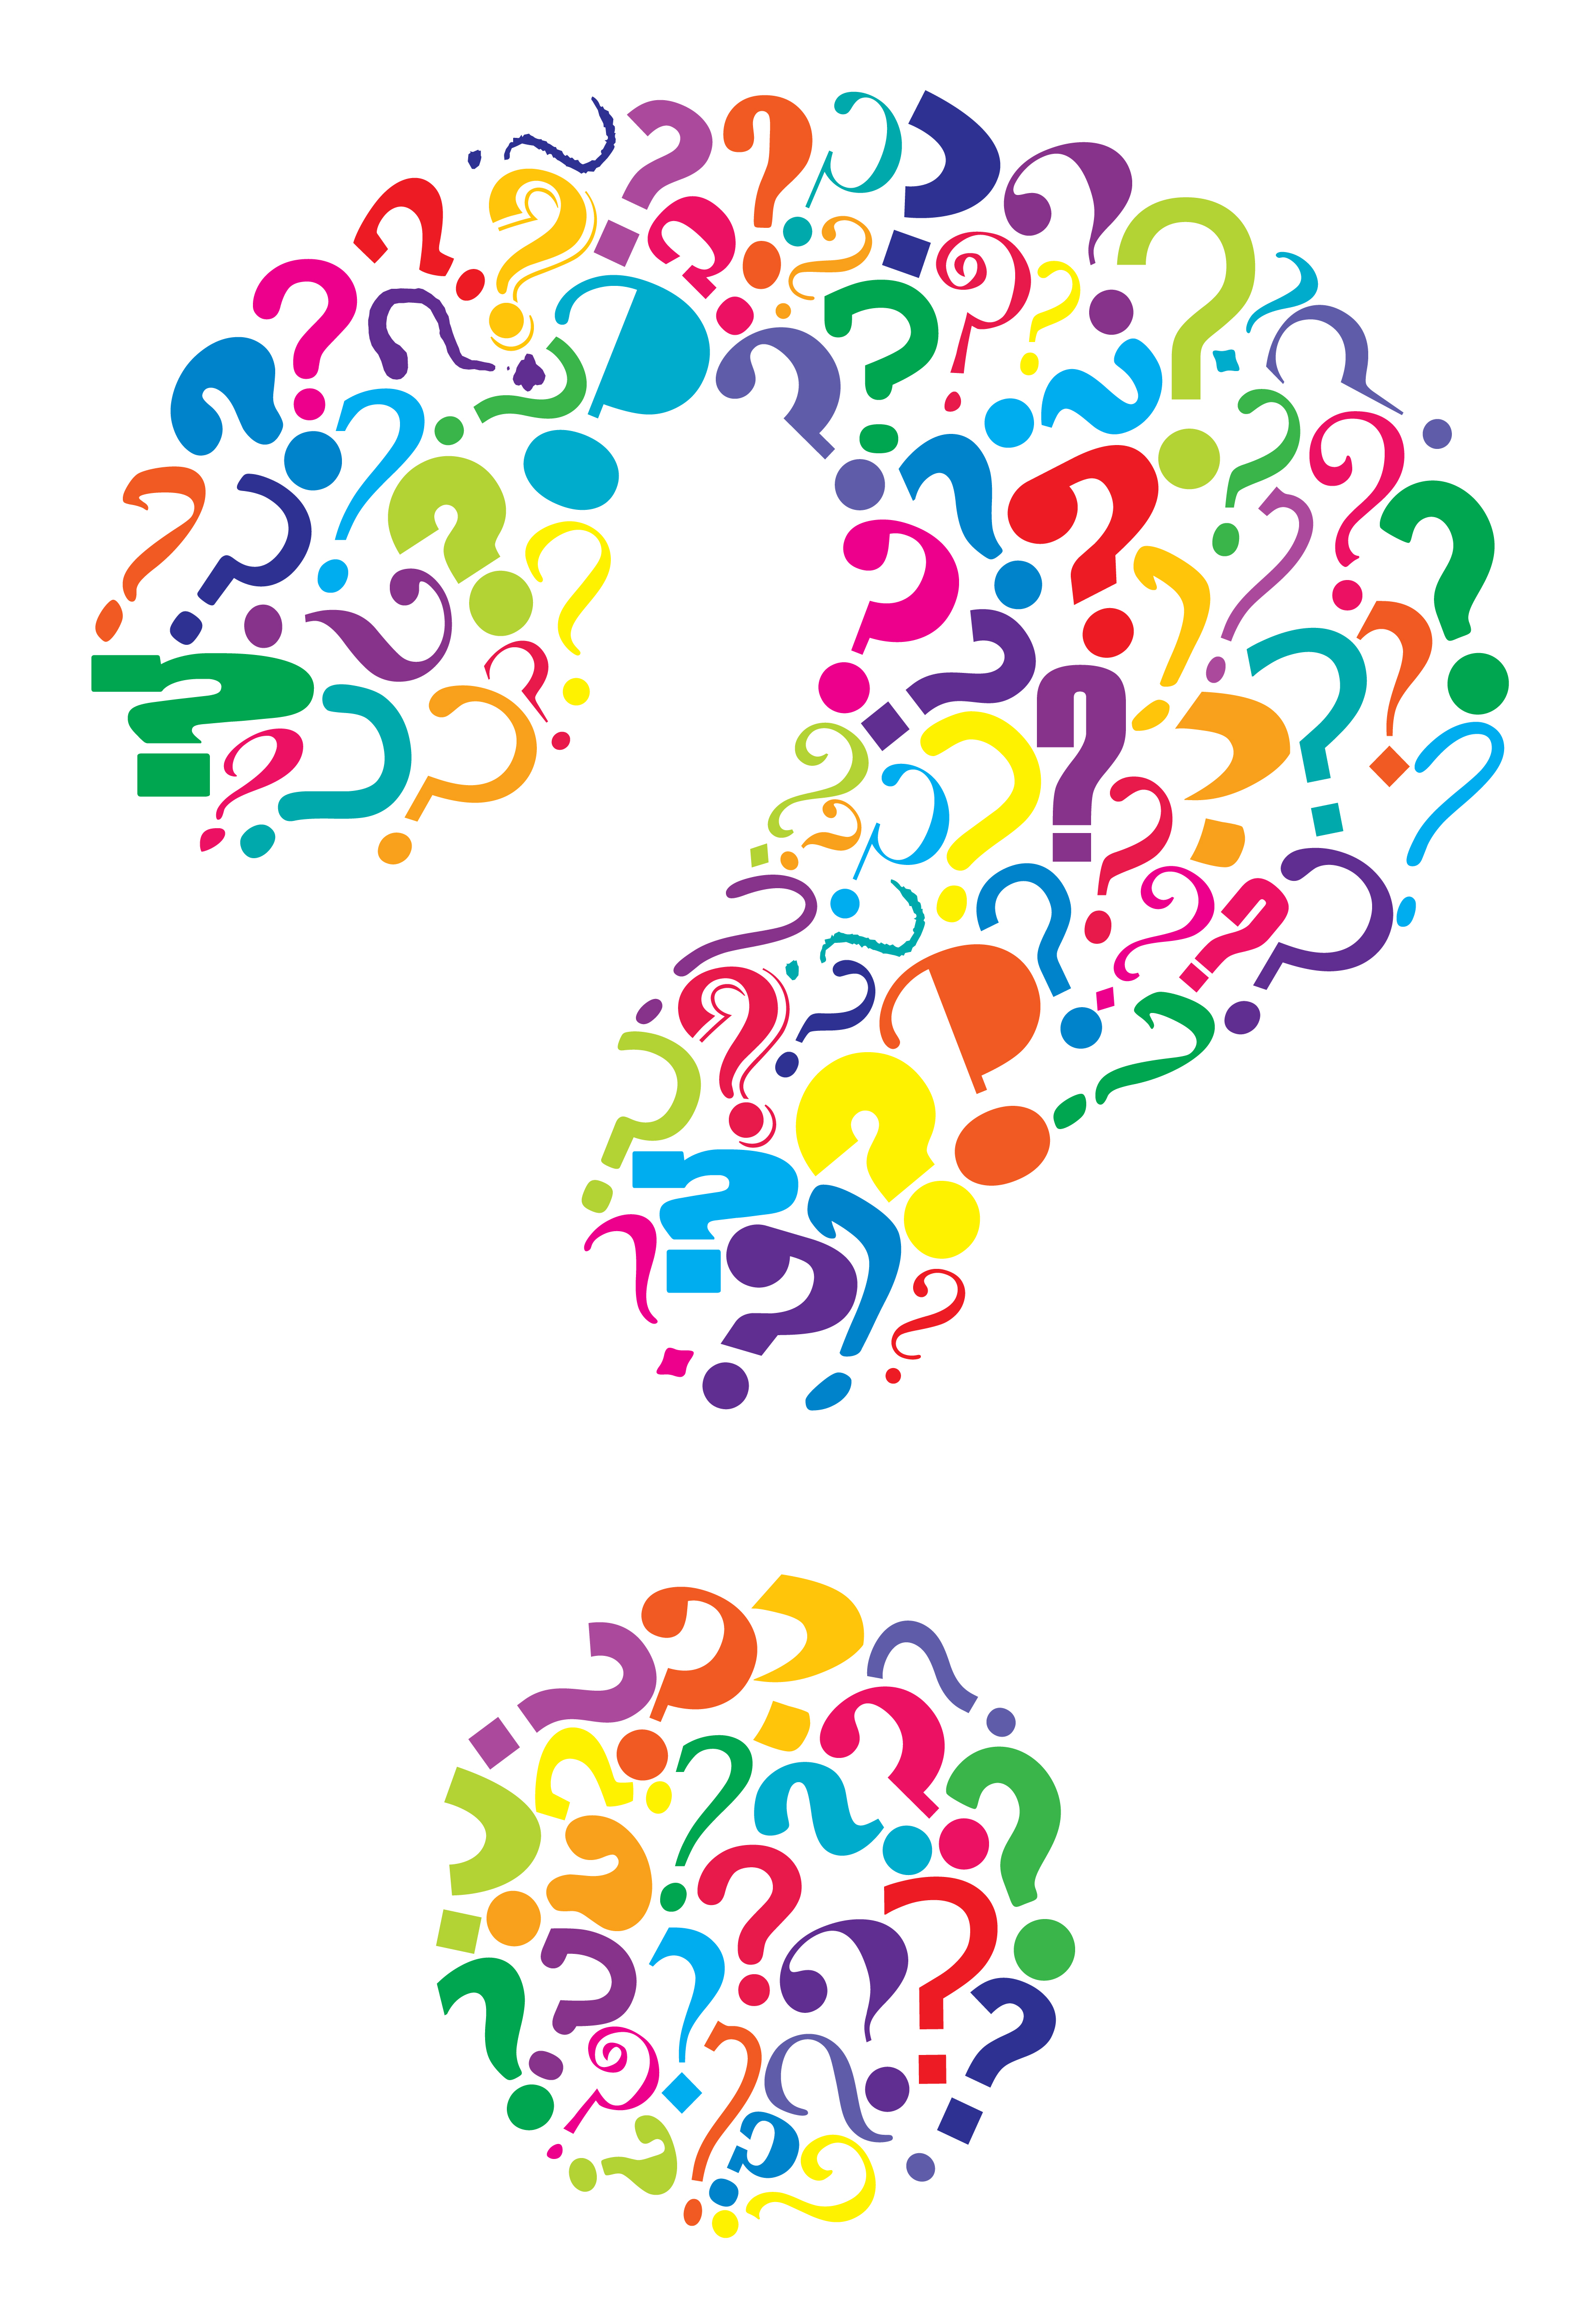 Bubble of the question mark clipart free image download - Clip Art Library